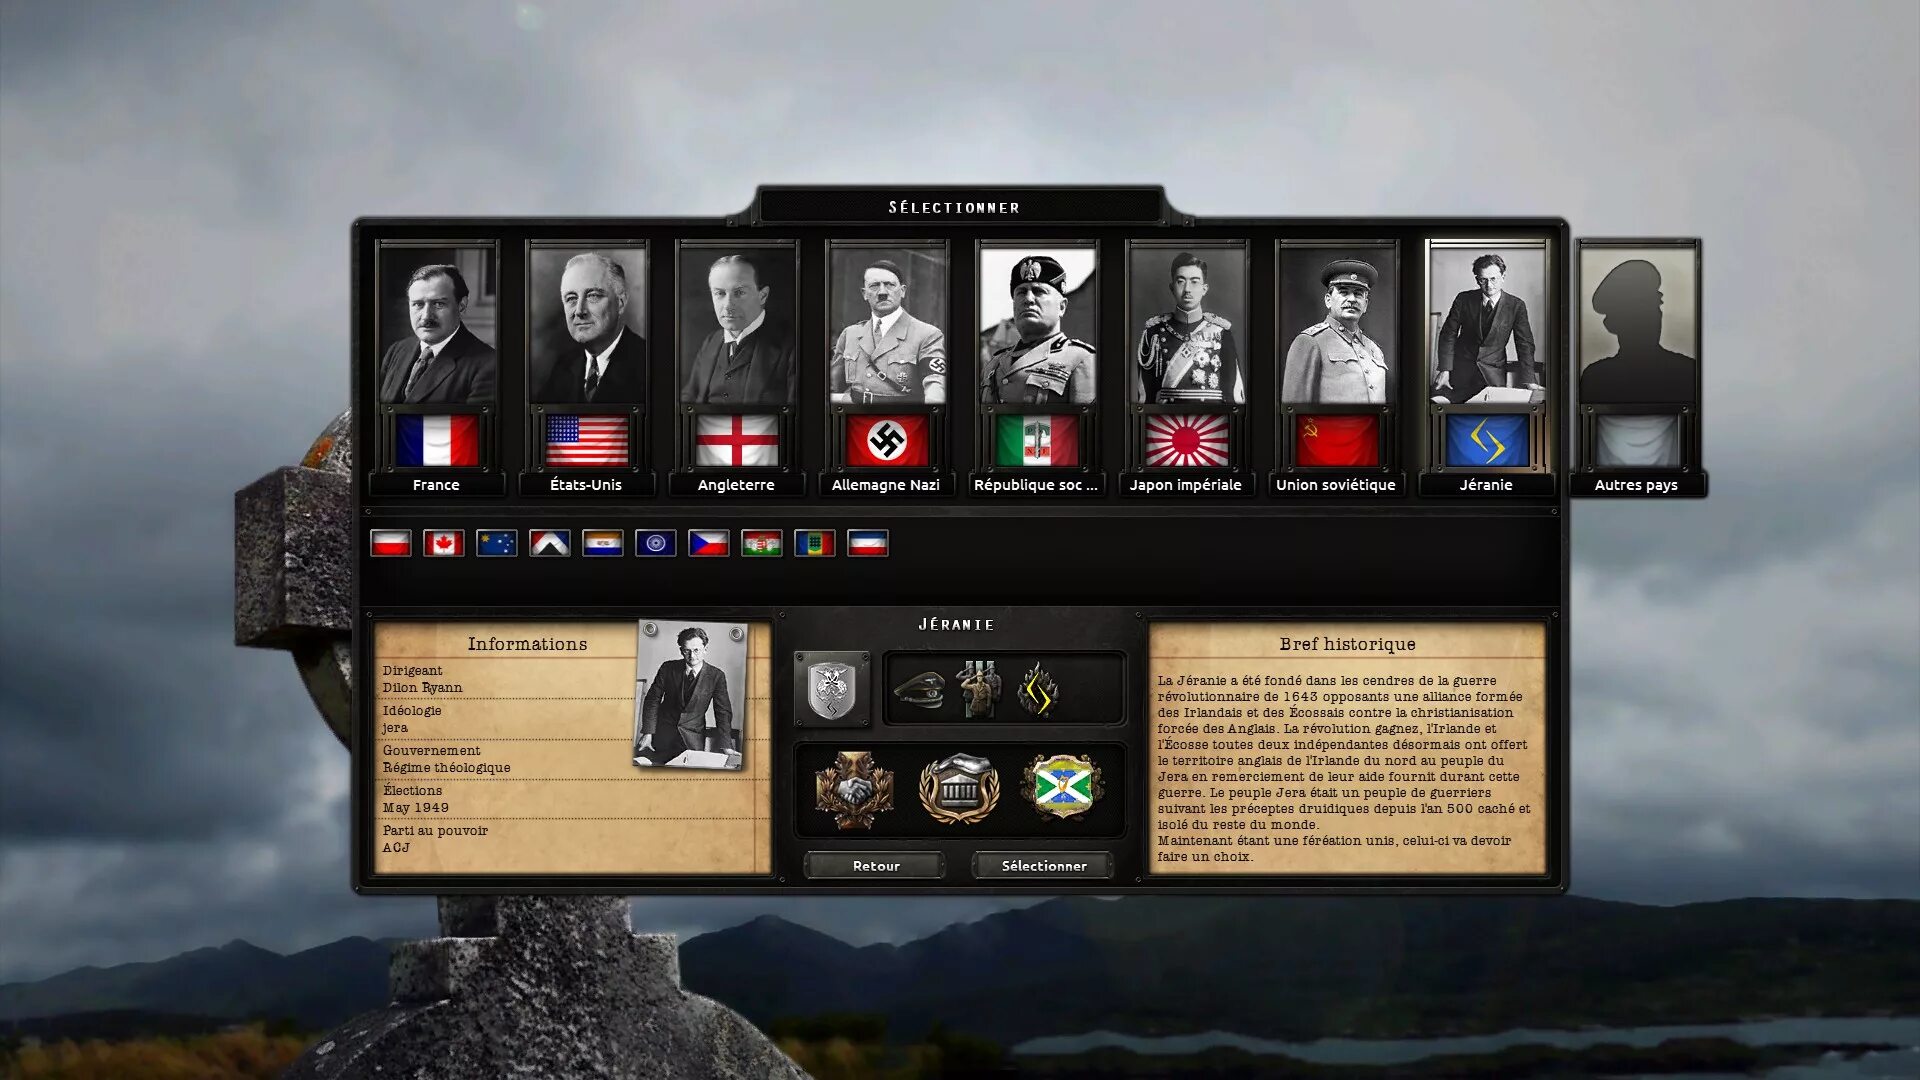 Hearts of iron новое длс. Hearts of Iron 4 menu. Hoi 4 меню. Hearts of Iron IV меню. Hearts of Iron 4 главное меню.